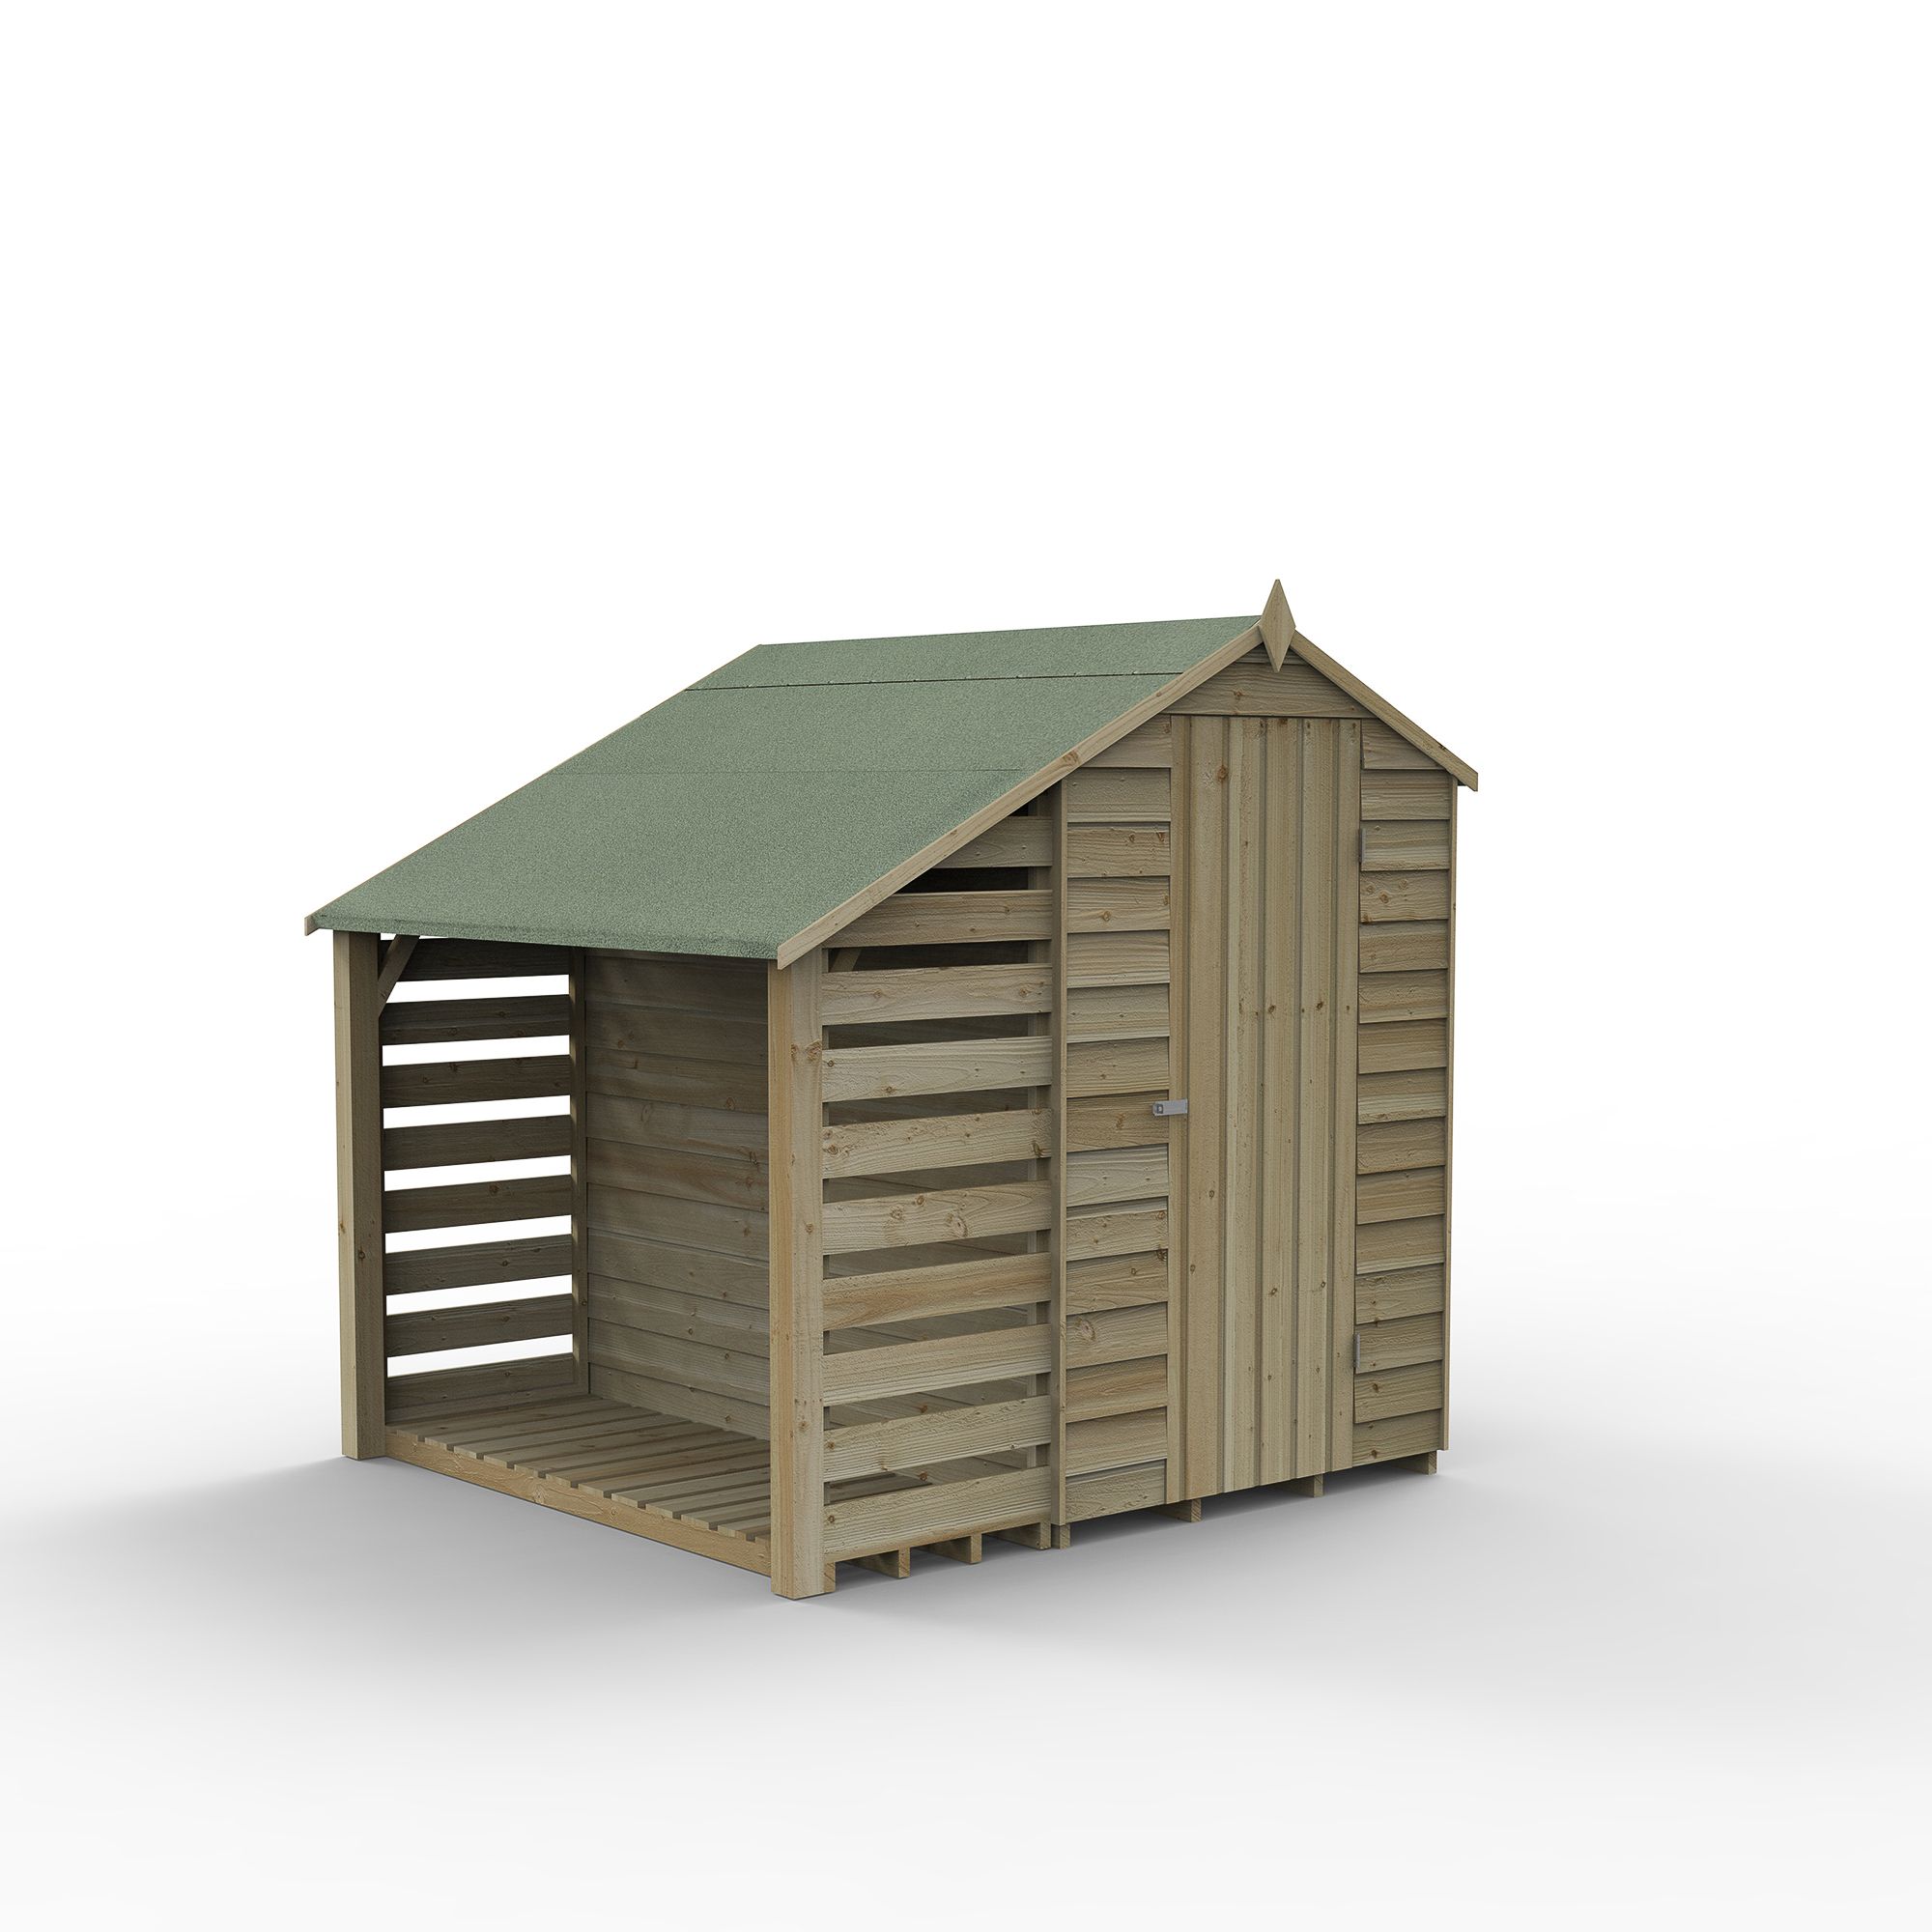 Forest Garden Shed Overlap 8x6 ft Apex Wooden Pressure treated 2 door Shed with floor & 2 windows - Assembly service included